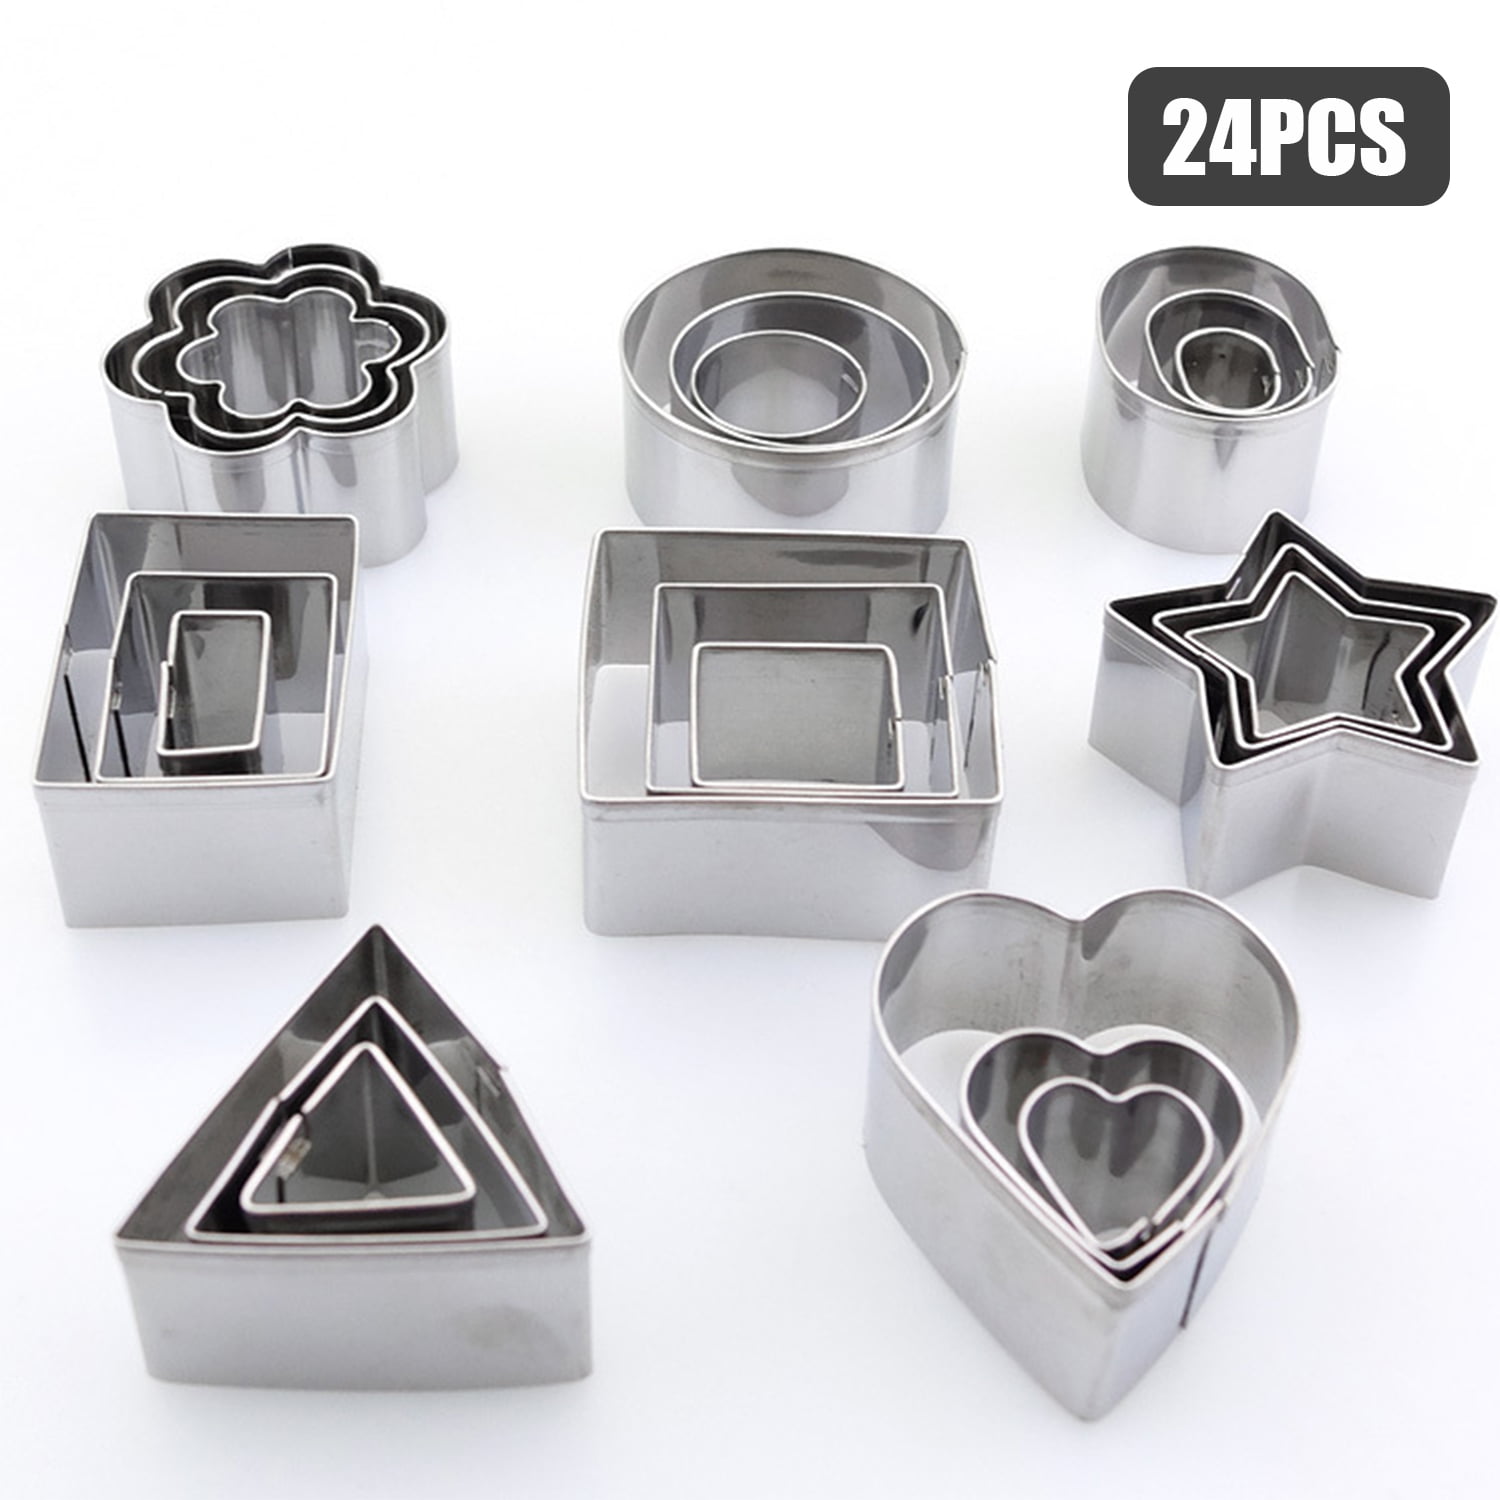 24 Pcs Cookie Biscuit Cutter Set Stainless Steel Pastry Fondant Cake Molds Tool 